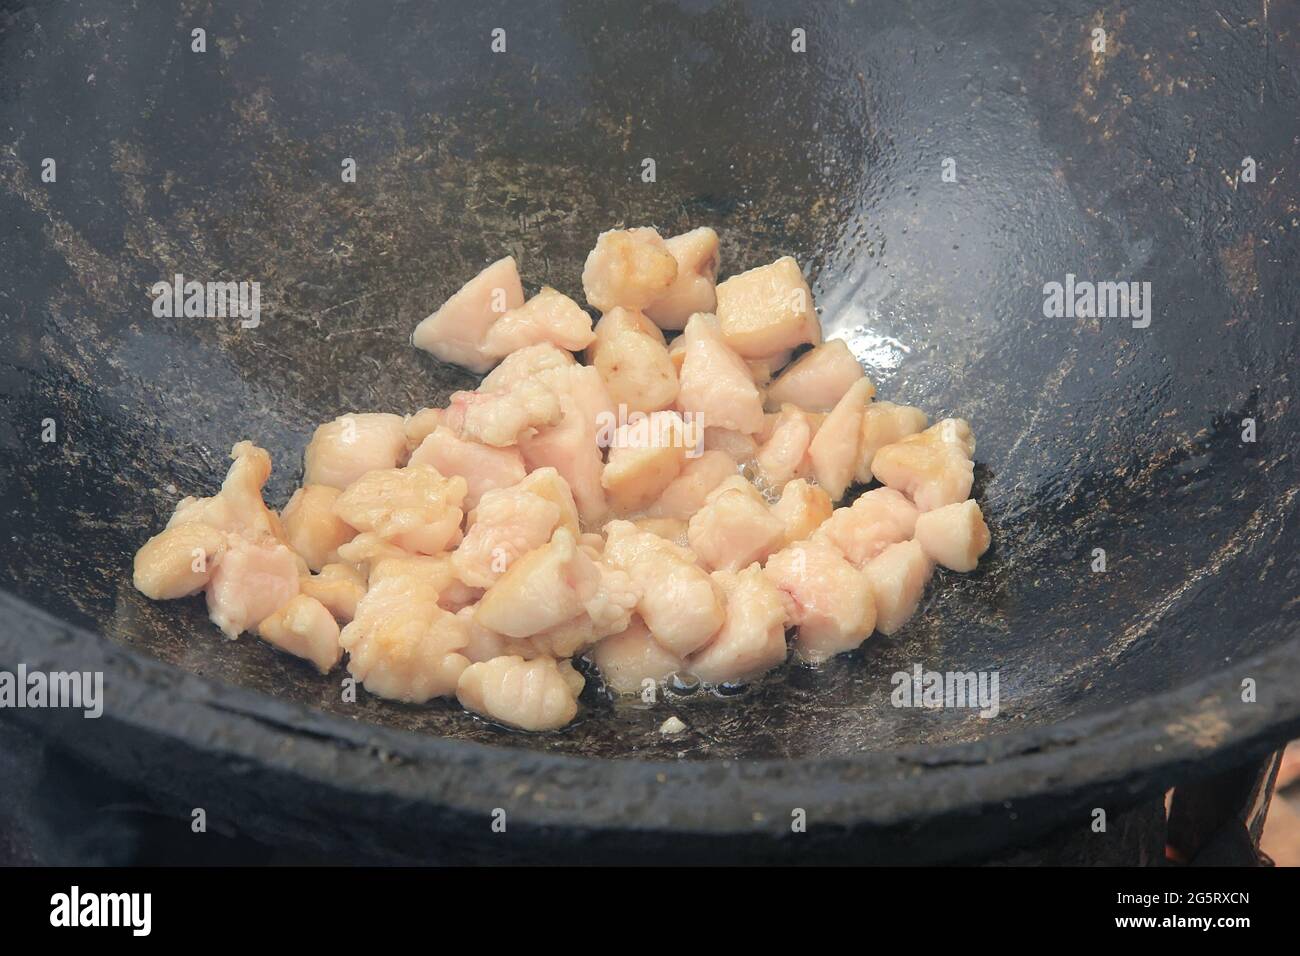 https://c8.alamy.com/comp/2G5RXCN/pieces-of-raw-lamb-fat-dumba-are-fried-in-a-black-cauldron-cooking-food-2G5RXCN.jpg